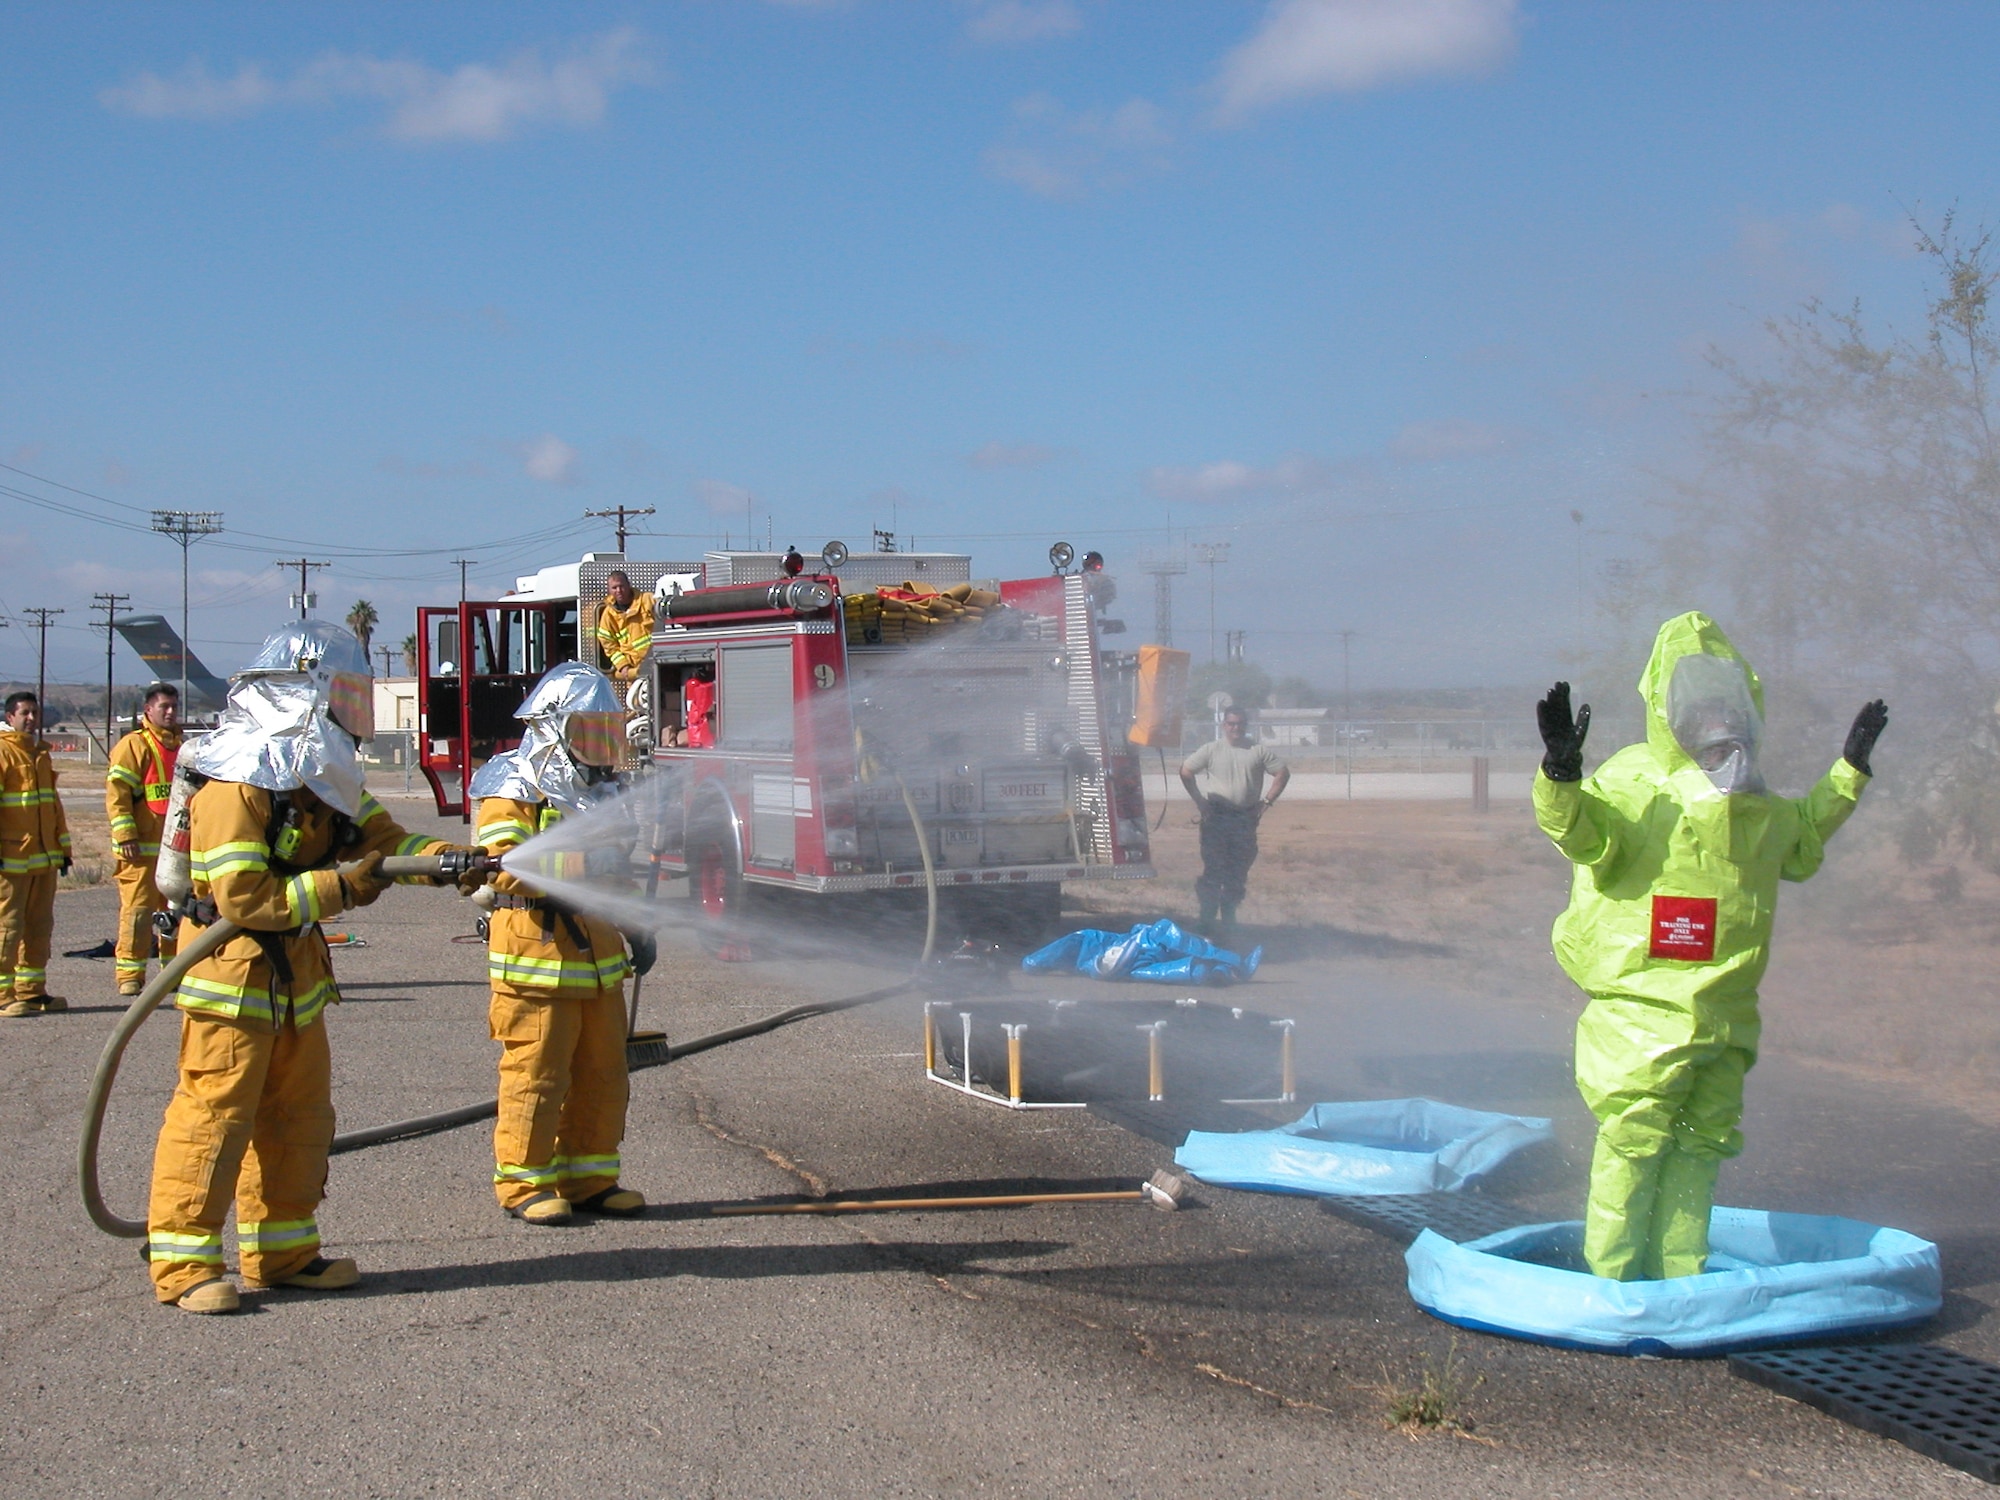 Senior Airman Travis Dean, 452nd Fire Department, hoses down Senior Airman Chris Valenzano, 163 EM Flight, in the decontamination area. Emergency management, bioenvironmental and the fire department work hand-inhand to ensure hazardous materials are properly identified, contained and disposed of. (U.S Air Force photo by Senior Airman Kara McGrath)